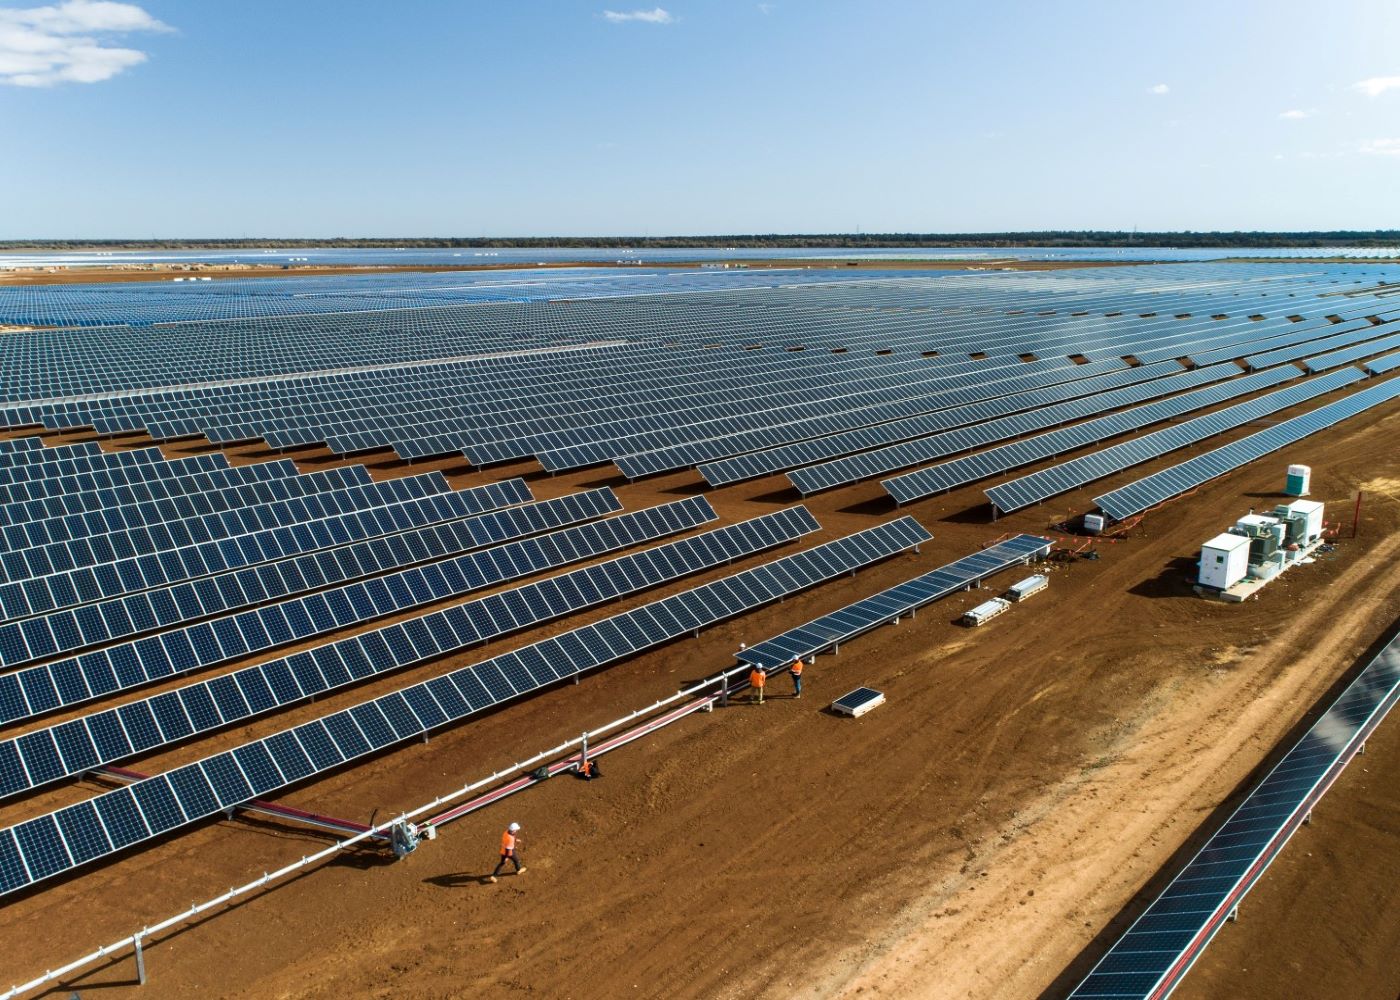 Neoen's Coleambally solar farm in New South Wales